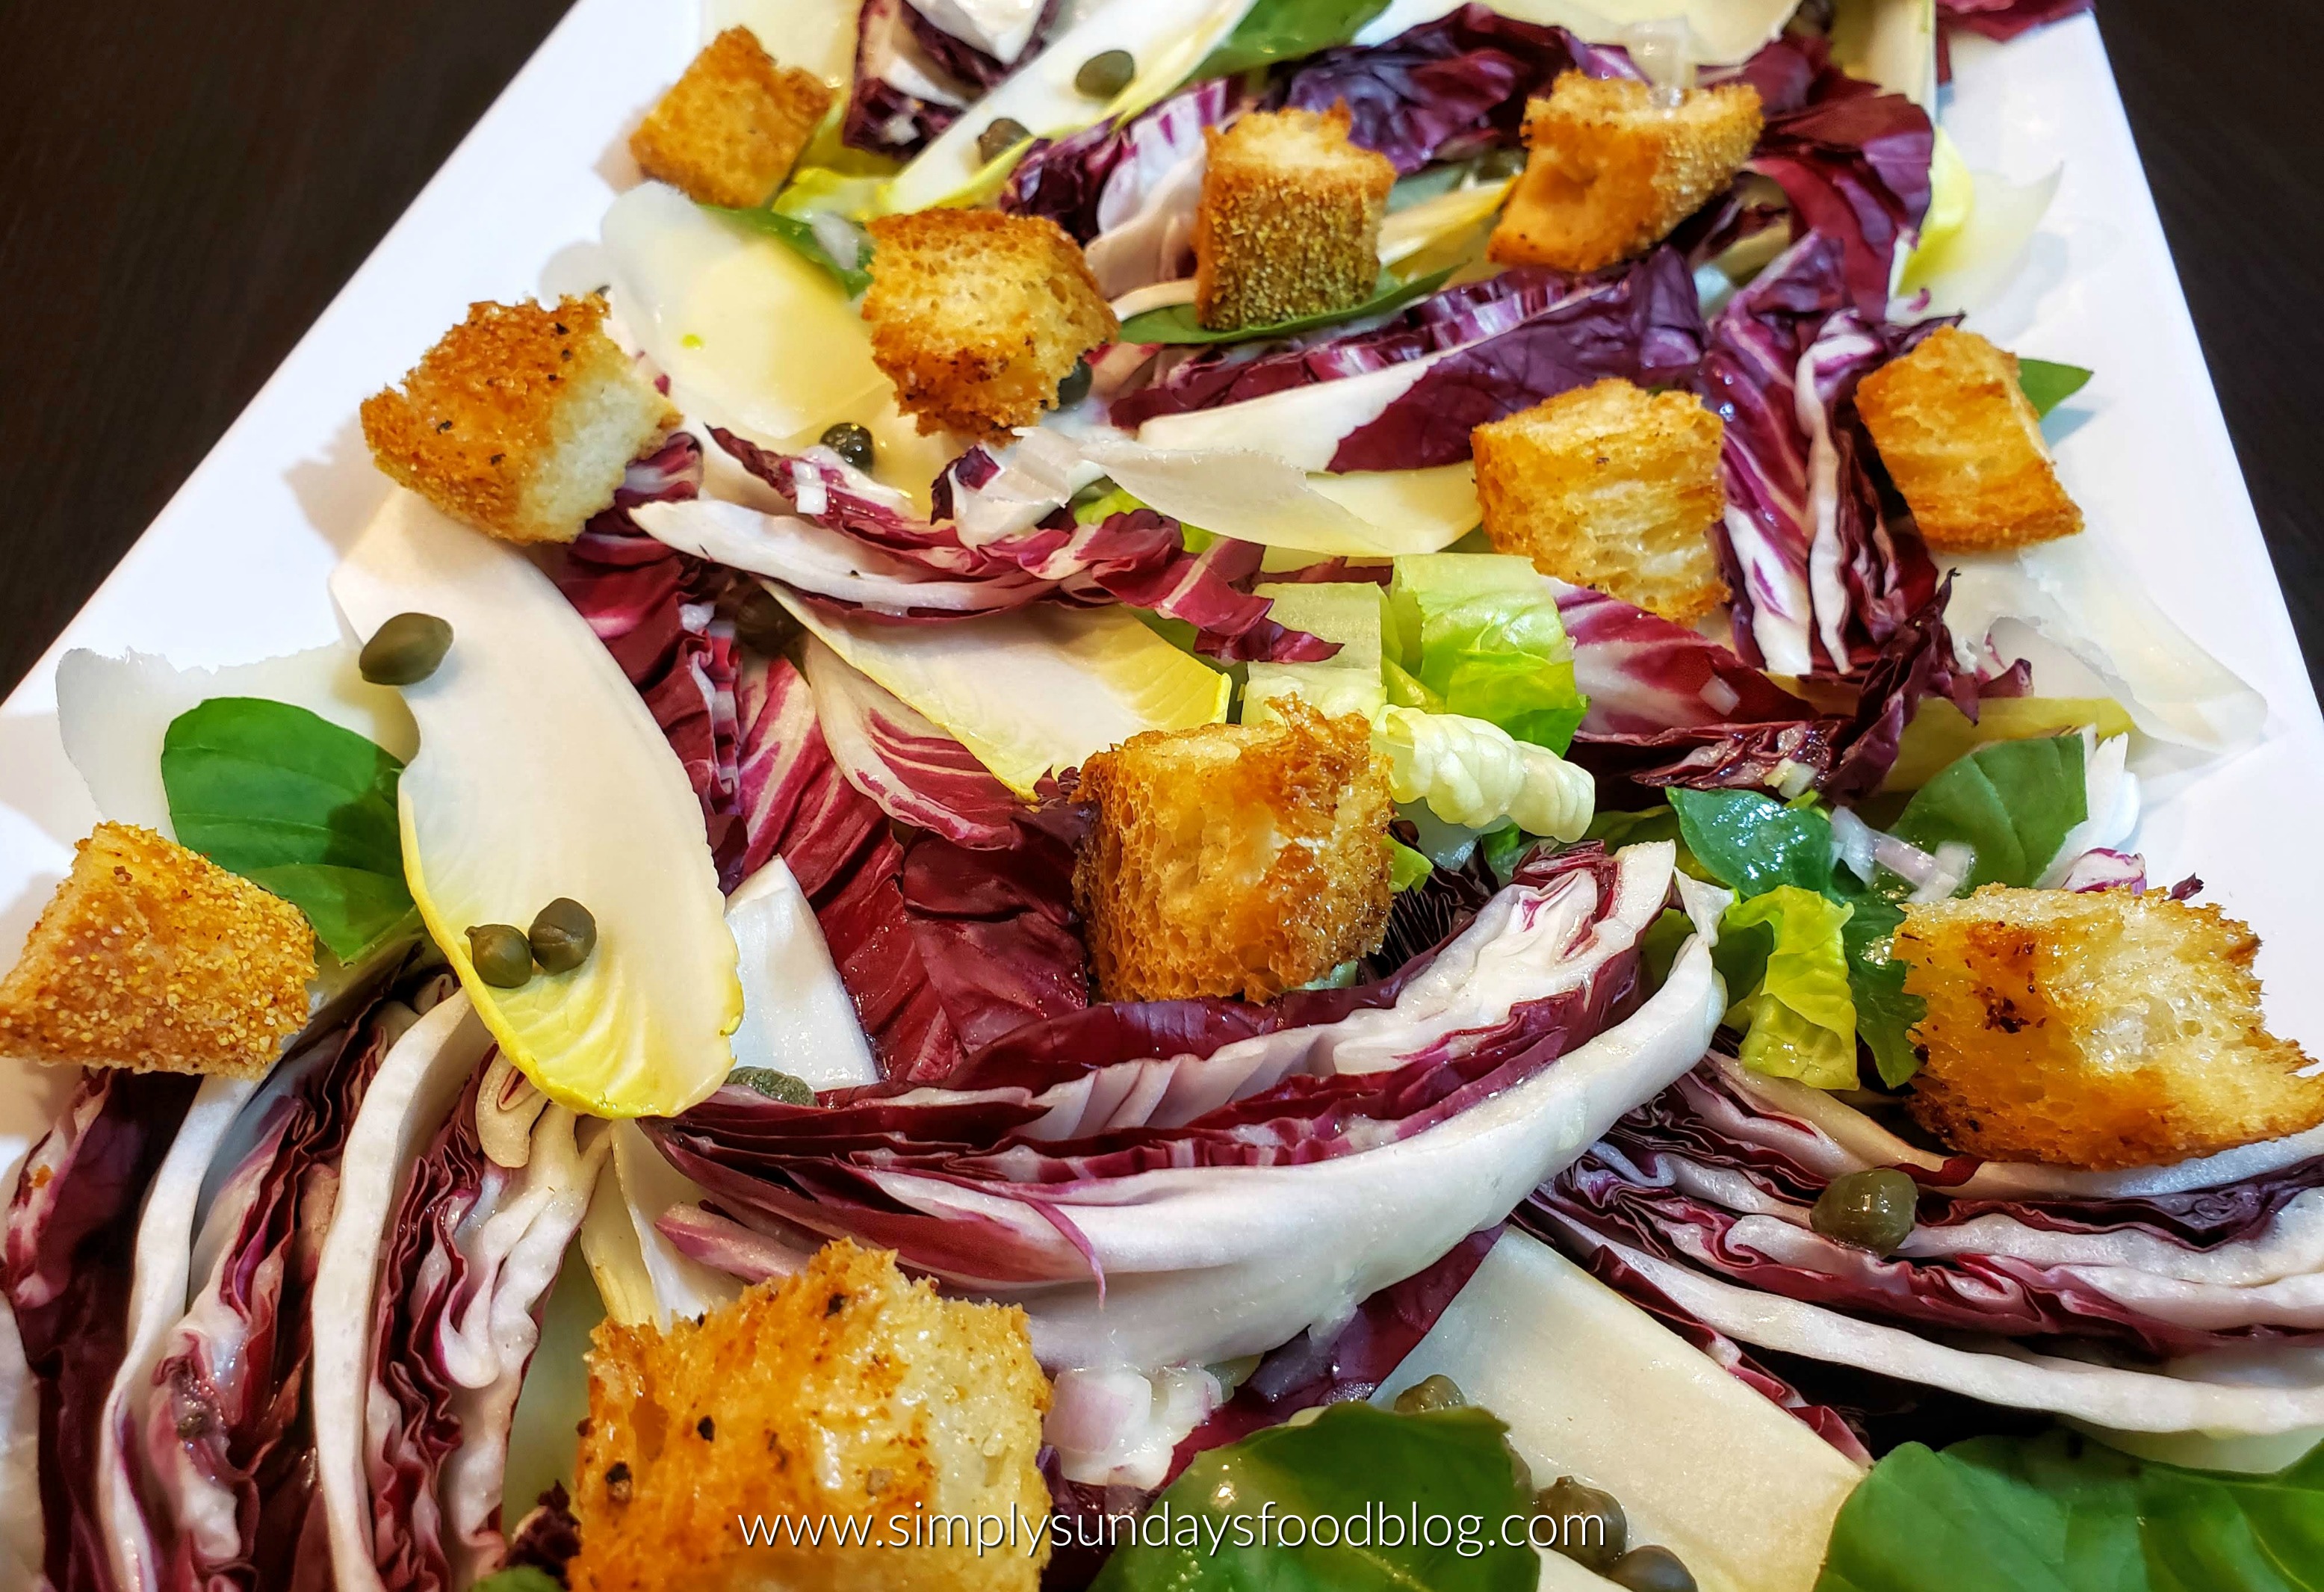 A platter of mild romaine lettuce, bold radicchio and crisp endive with crunchy homemade croutons, creamy parmesan drizzled with dijon vinaigrette